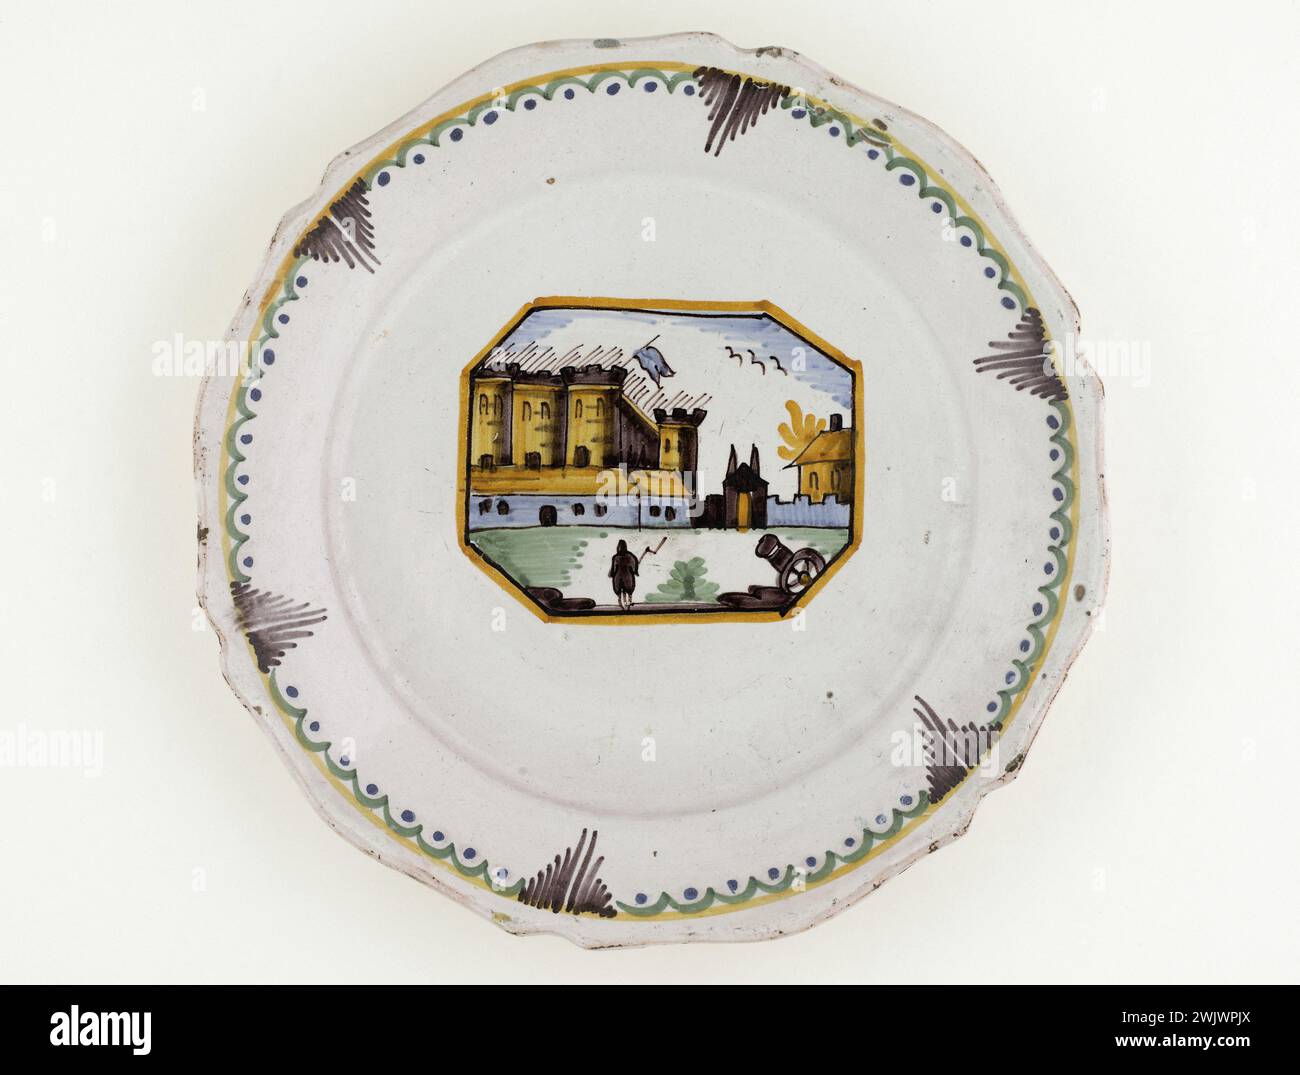 Anonymous. Plate at the Bastille. Earthenware. Around 1789. Paris, Carnavalet museum. 72429-35 Bastille, Chateau Fort, Faience, Fortress, Revolutionary Periode, Prison, French Revolution, Plate Stock Photo